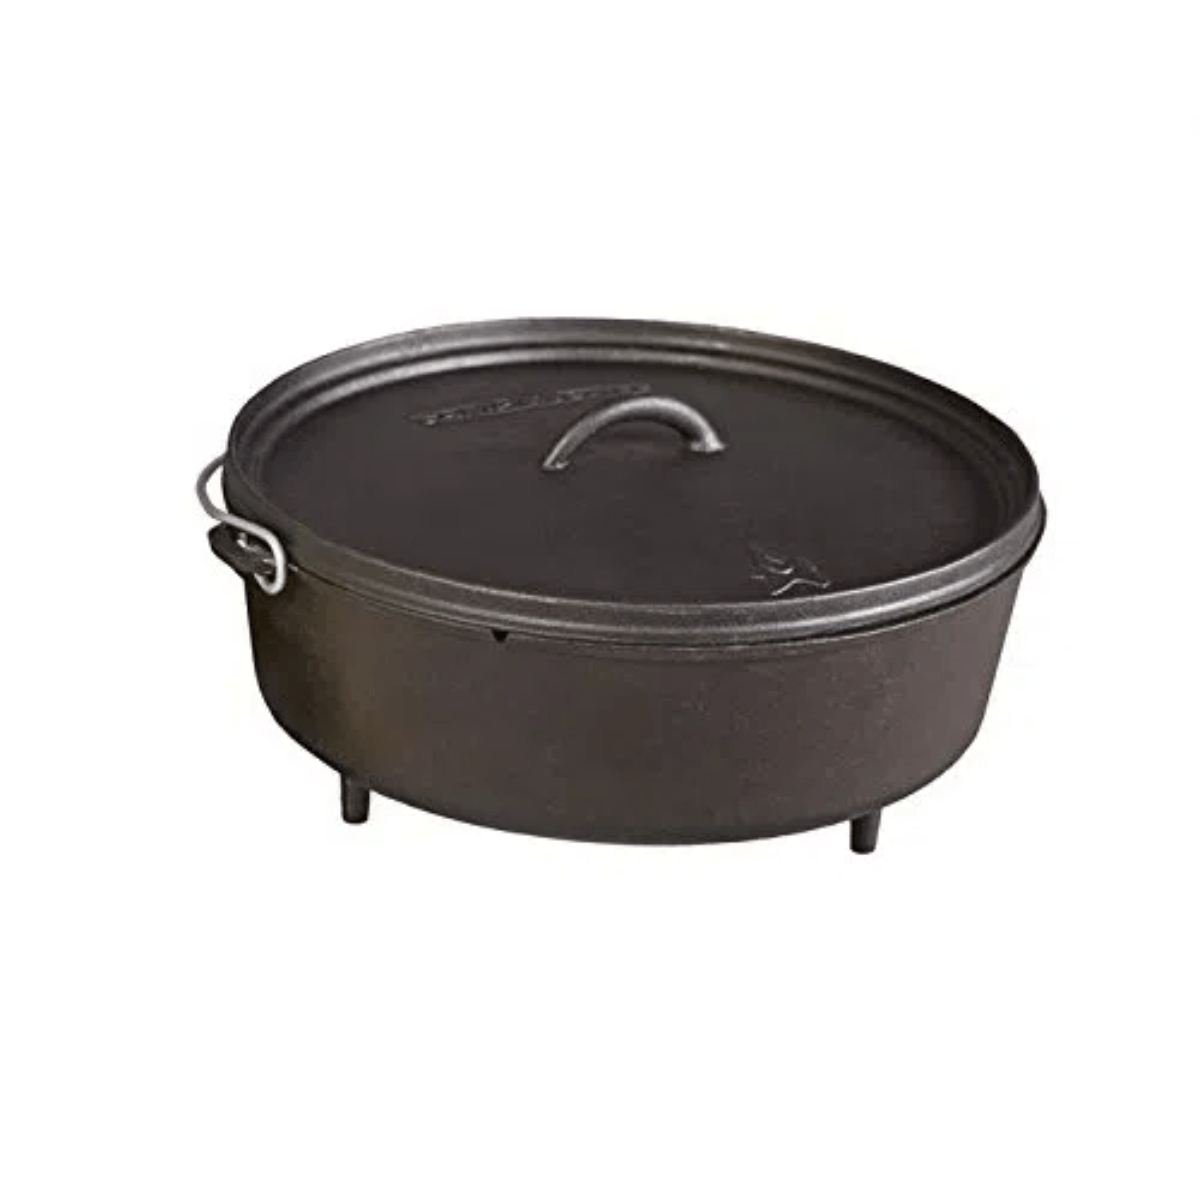 Camp Chef National Parks Cast Iron Set (12 in Dutch Oven, 12 in